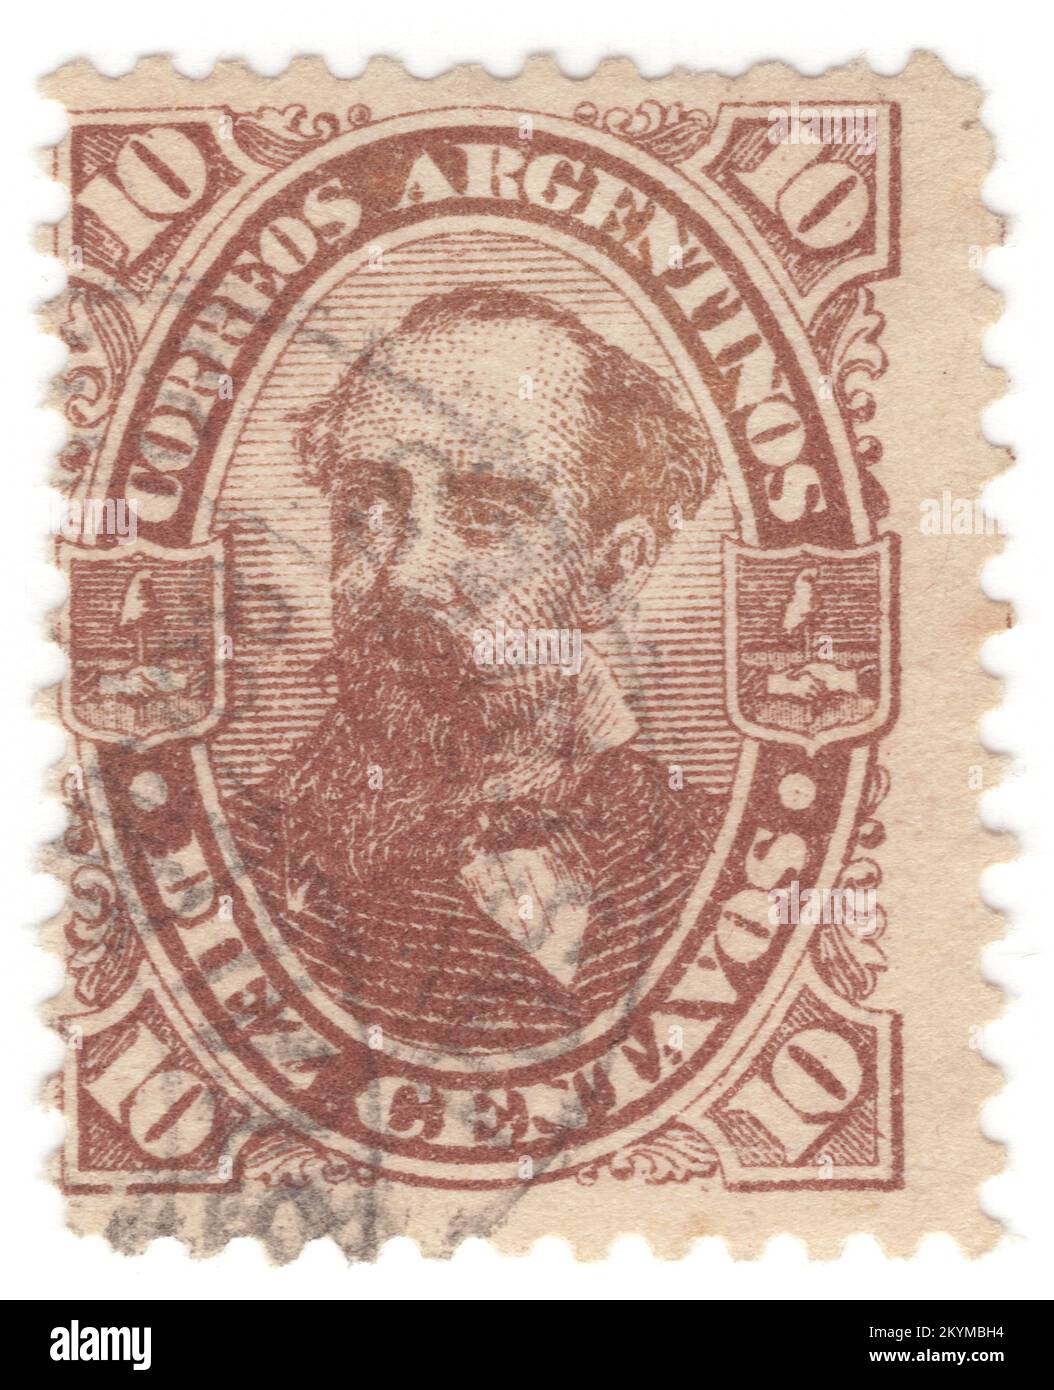 ARGENTINA - 1888: 10 centavos brown postage stamp depicting portrait of Nicolas Remigio Aurelio Avellaneda Silva. He was an Argentine politician and journalist, and President of Argentina from 1874 to 1880. Avellaneda's main projects while in office were banking and education reform, leading to Argentina's economic growth. The most important events of his government were the Conquest of the Desert and the transformation of the Buenos Aires into a federal district. His grandson was Jose Domingo Molina Gomez, who took presidency when Juan Peron was captured Stock Photo